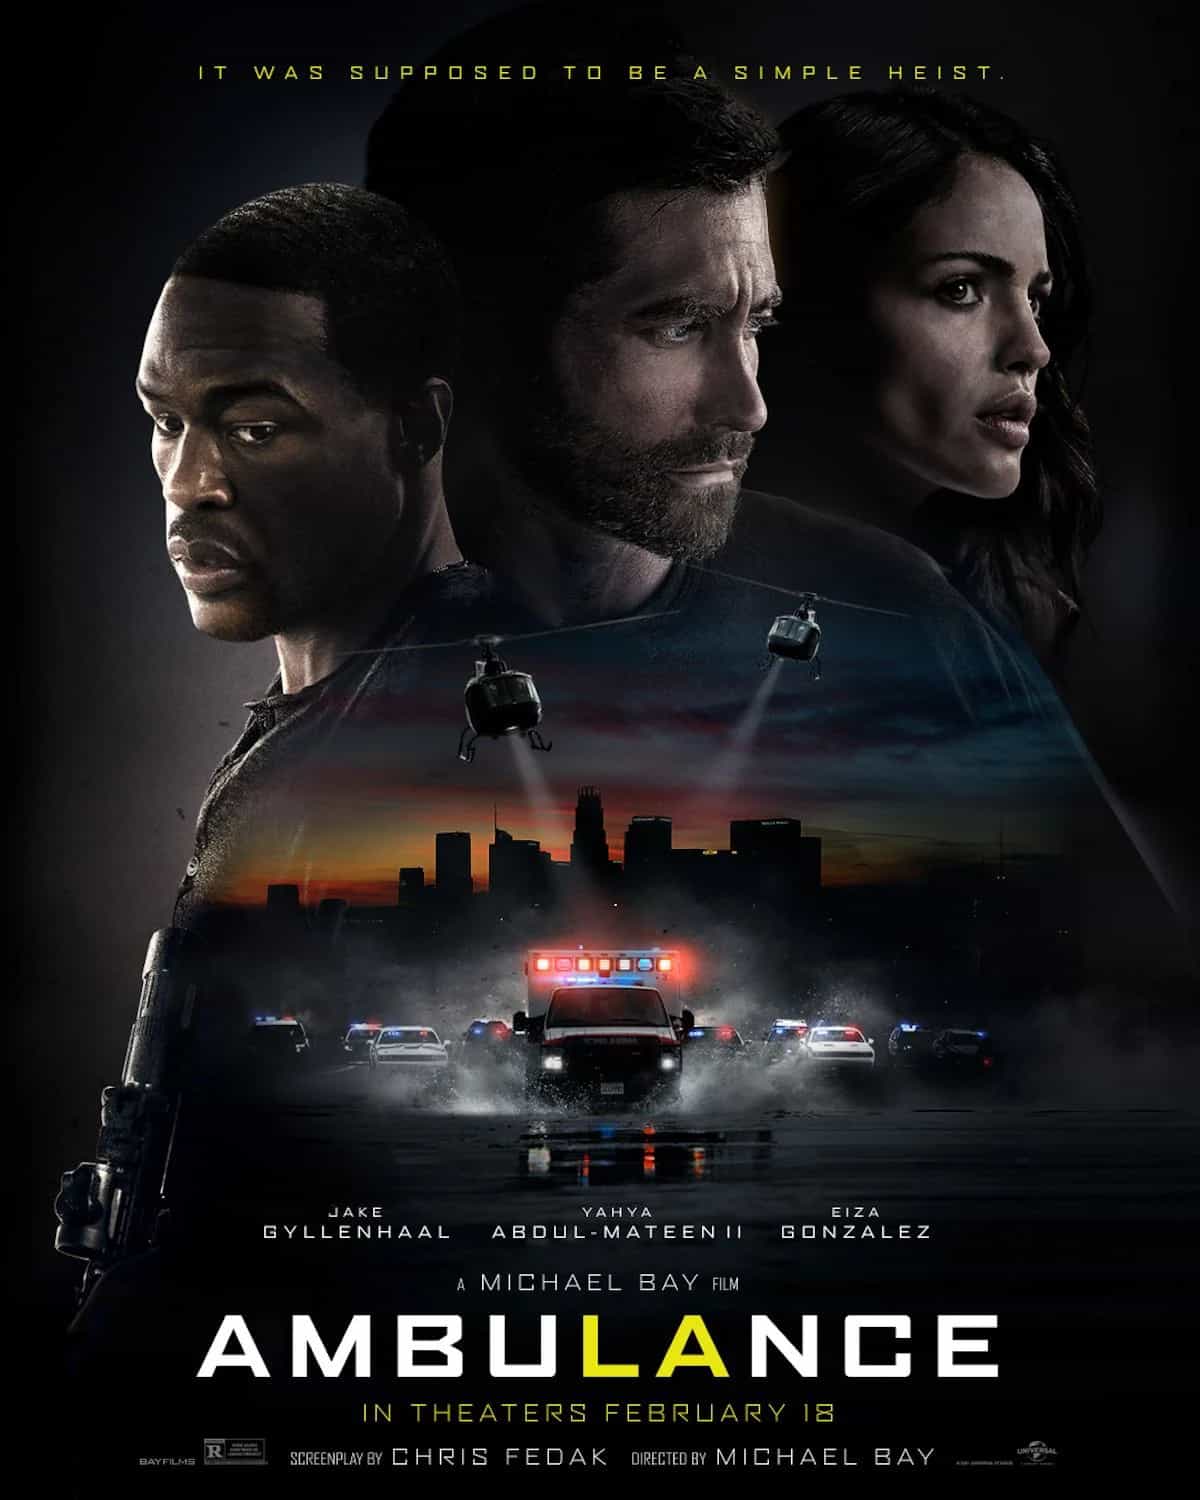 Ambulance is given a 15 age rating in the UK for strong bloody violence, language, threat, medical gore